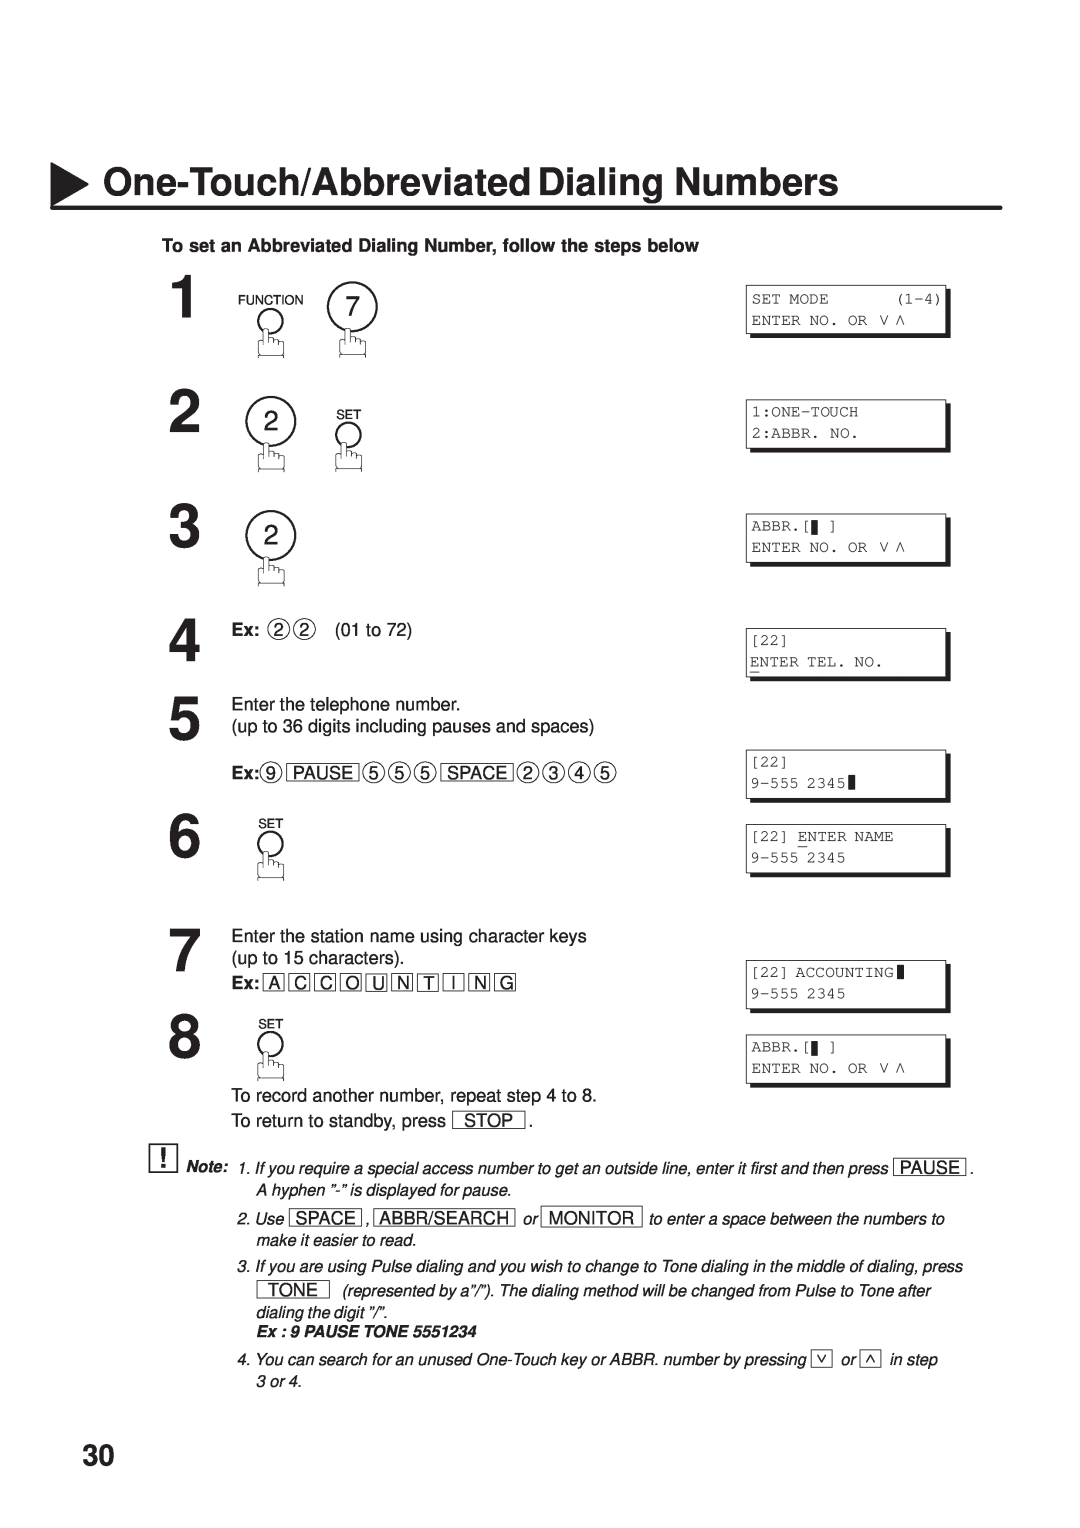 Panasonic UF-333 manual One-Touch/Abbreviated Dialing Numbers, To set an Abbreviated Dialing Number, follow the steps below 